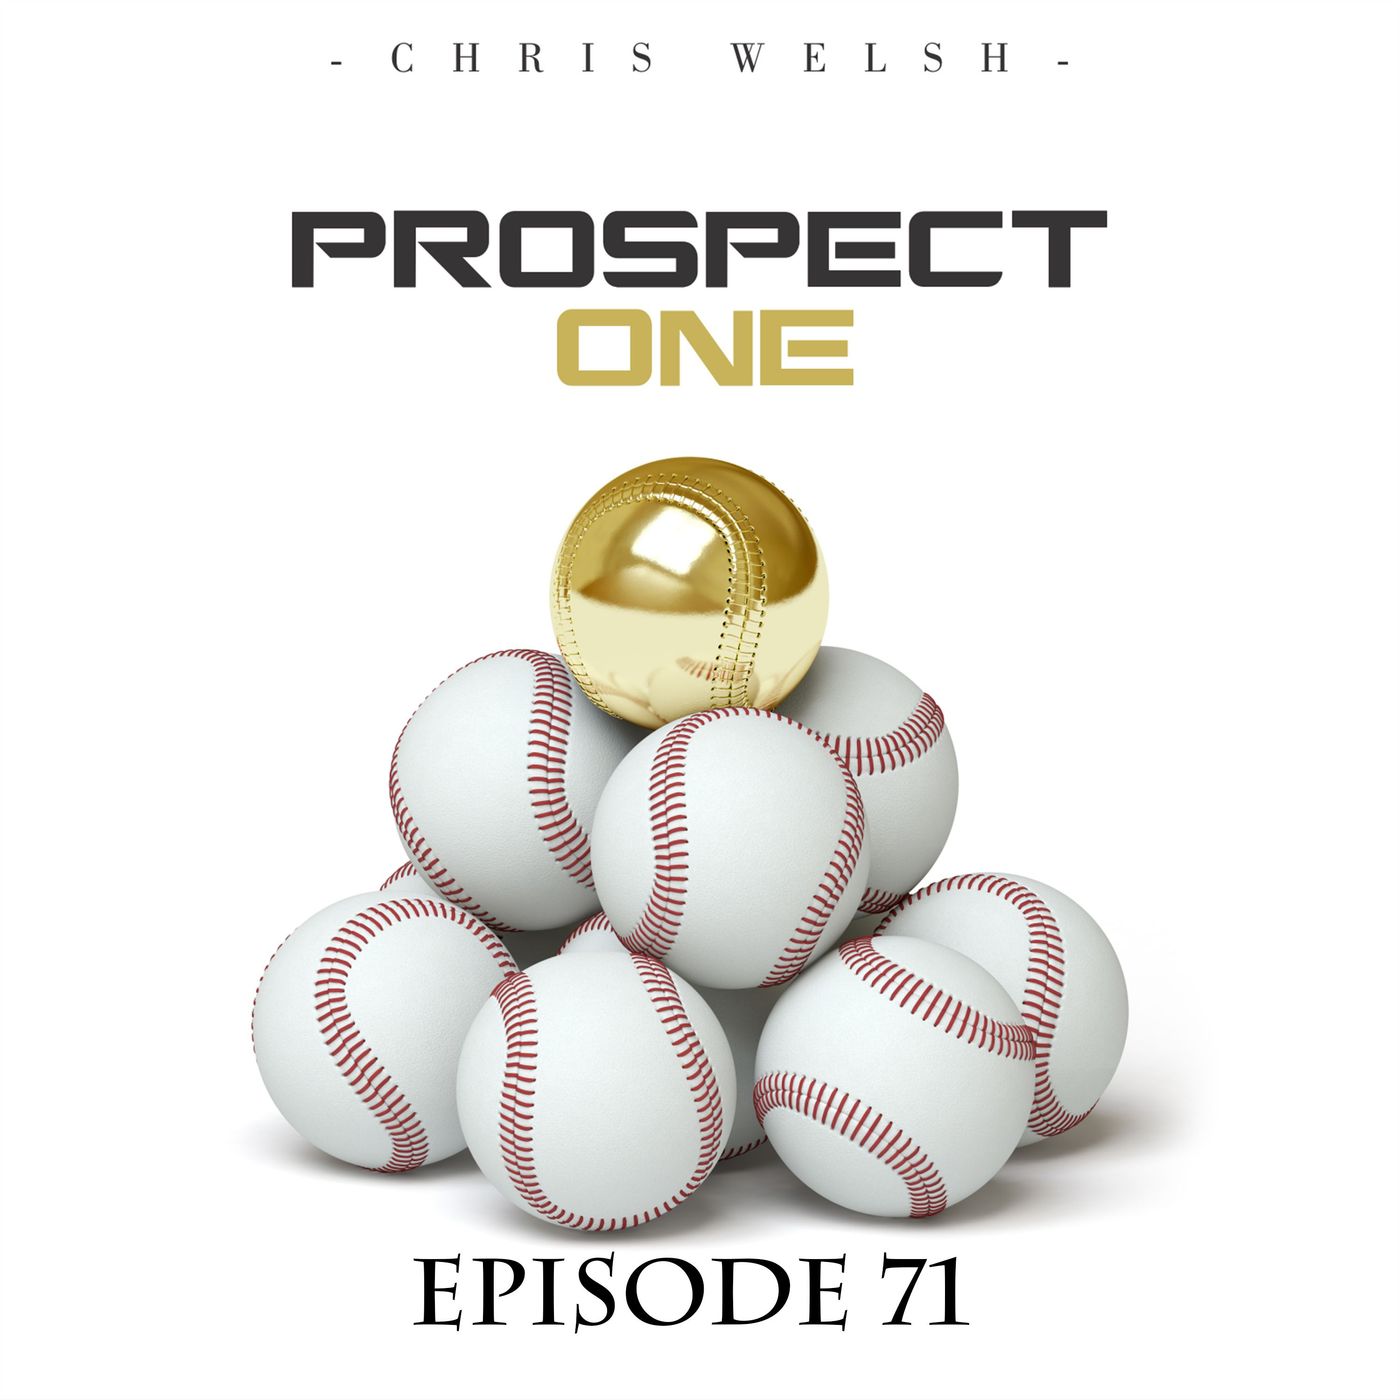 Episode 71 - MLB Draft Prospects With Chris Blessing, Jason Woodell And Eddy Almaguer